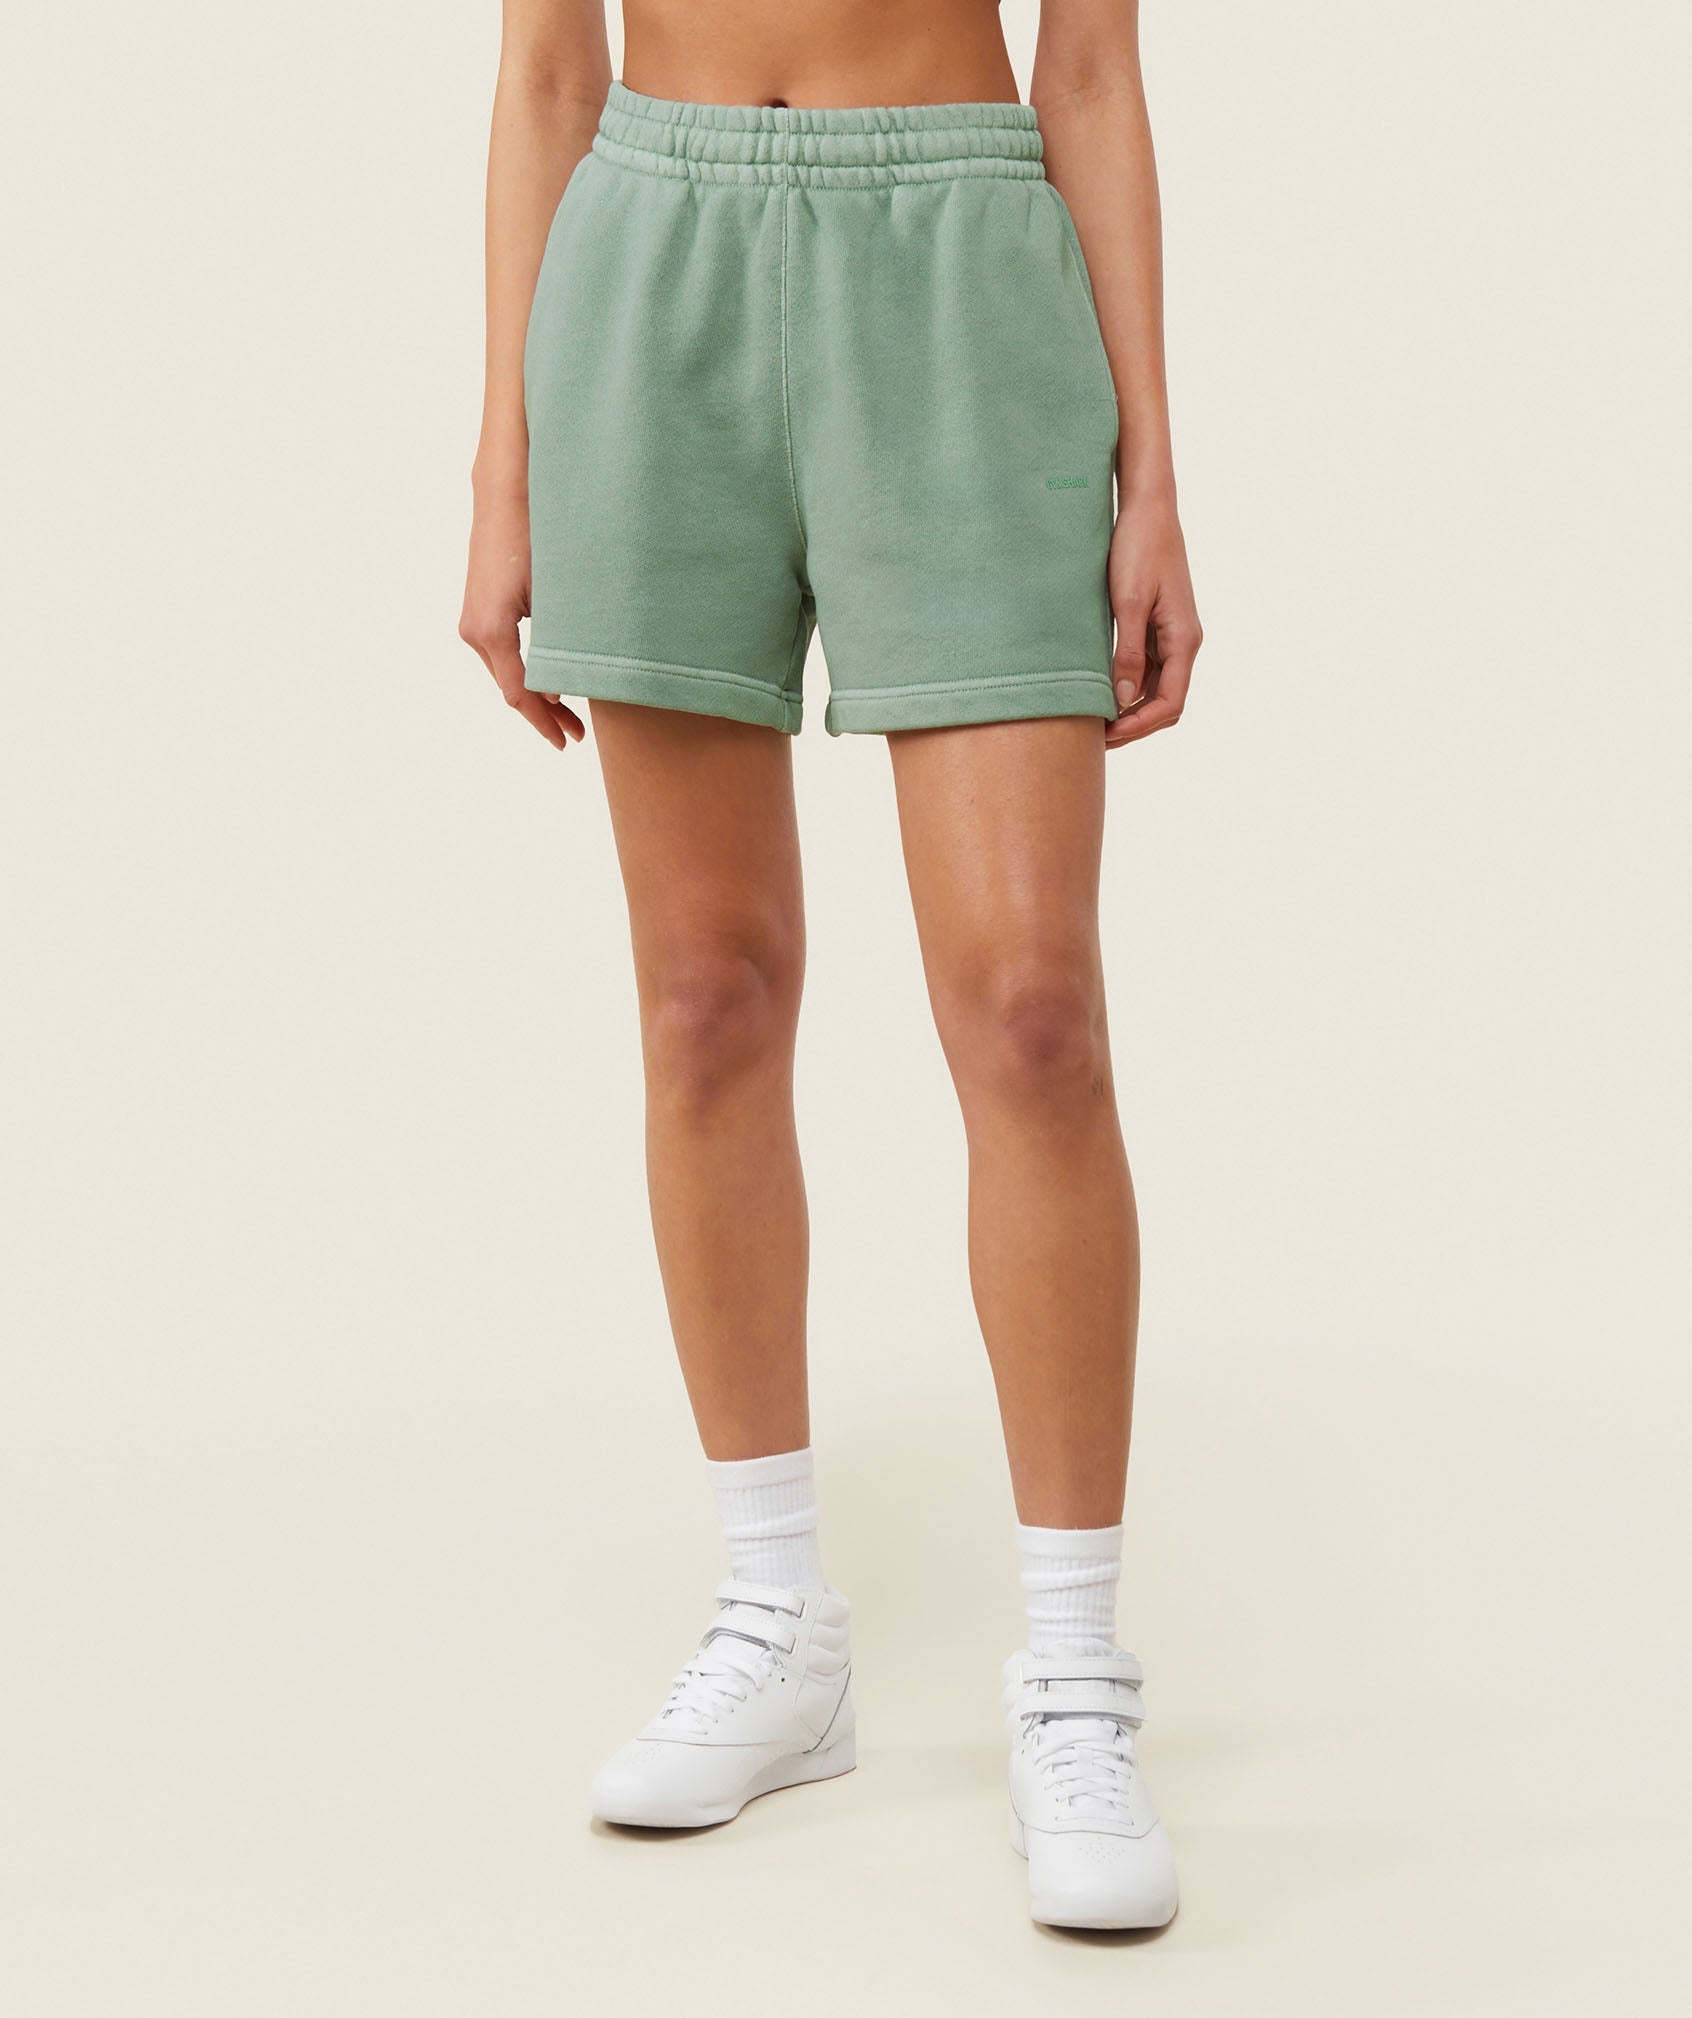 everywear Relaxed Sweat Shorts in Dollar Green - view 1